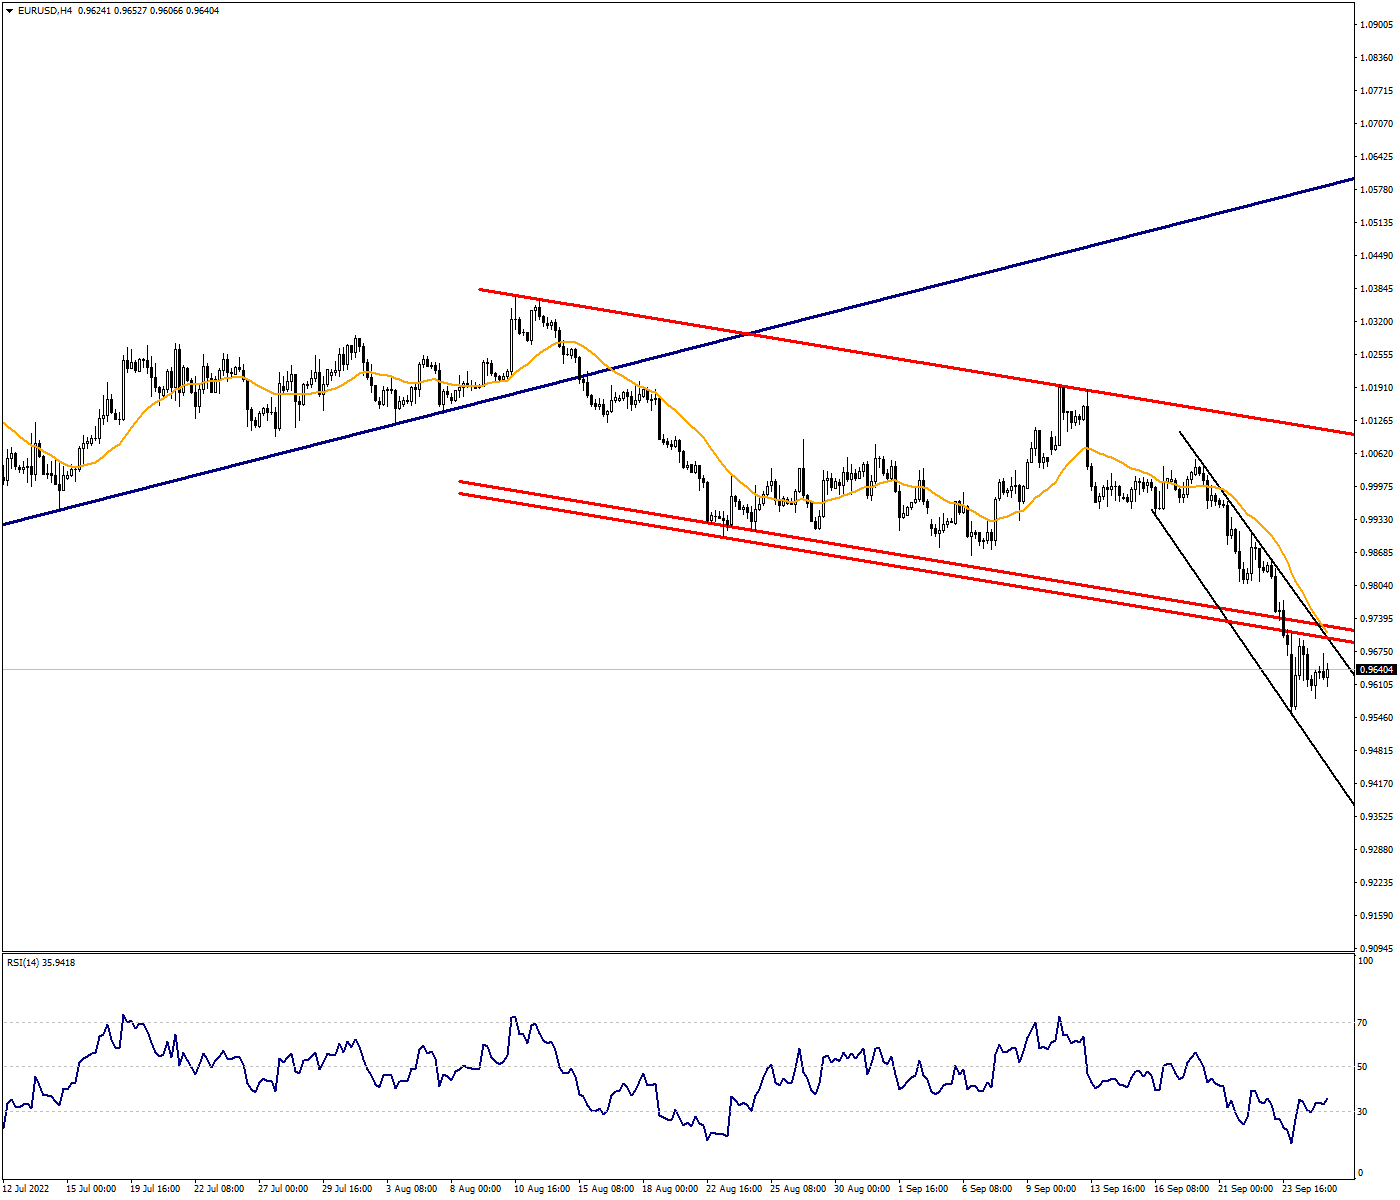 EURUSD Continues to Defend the Descending Channel